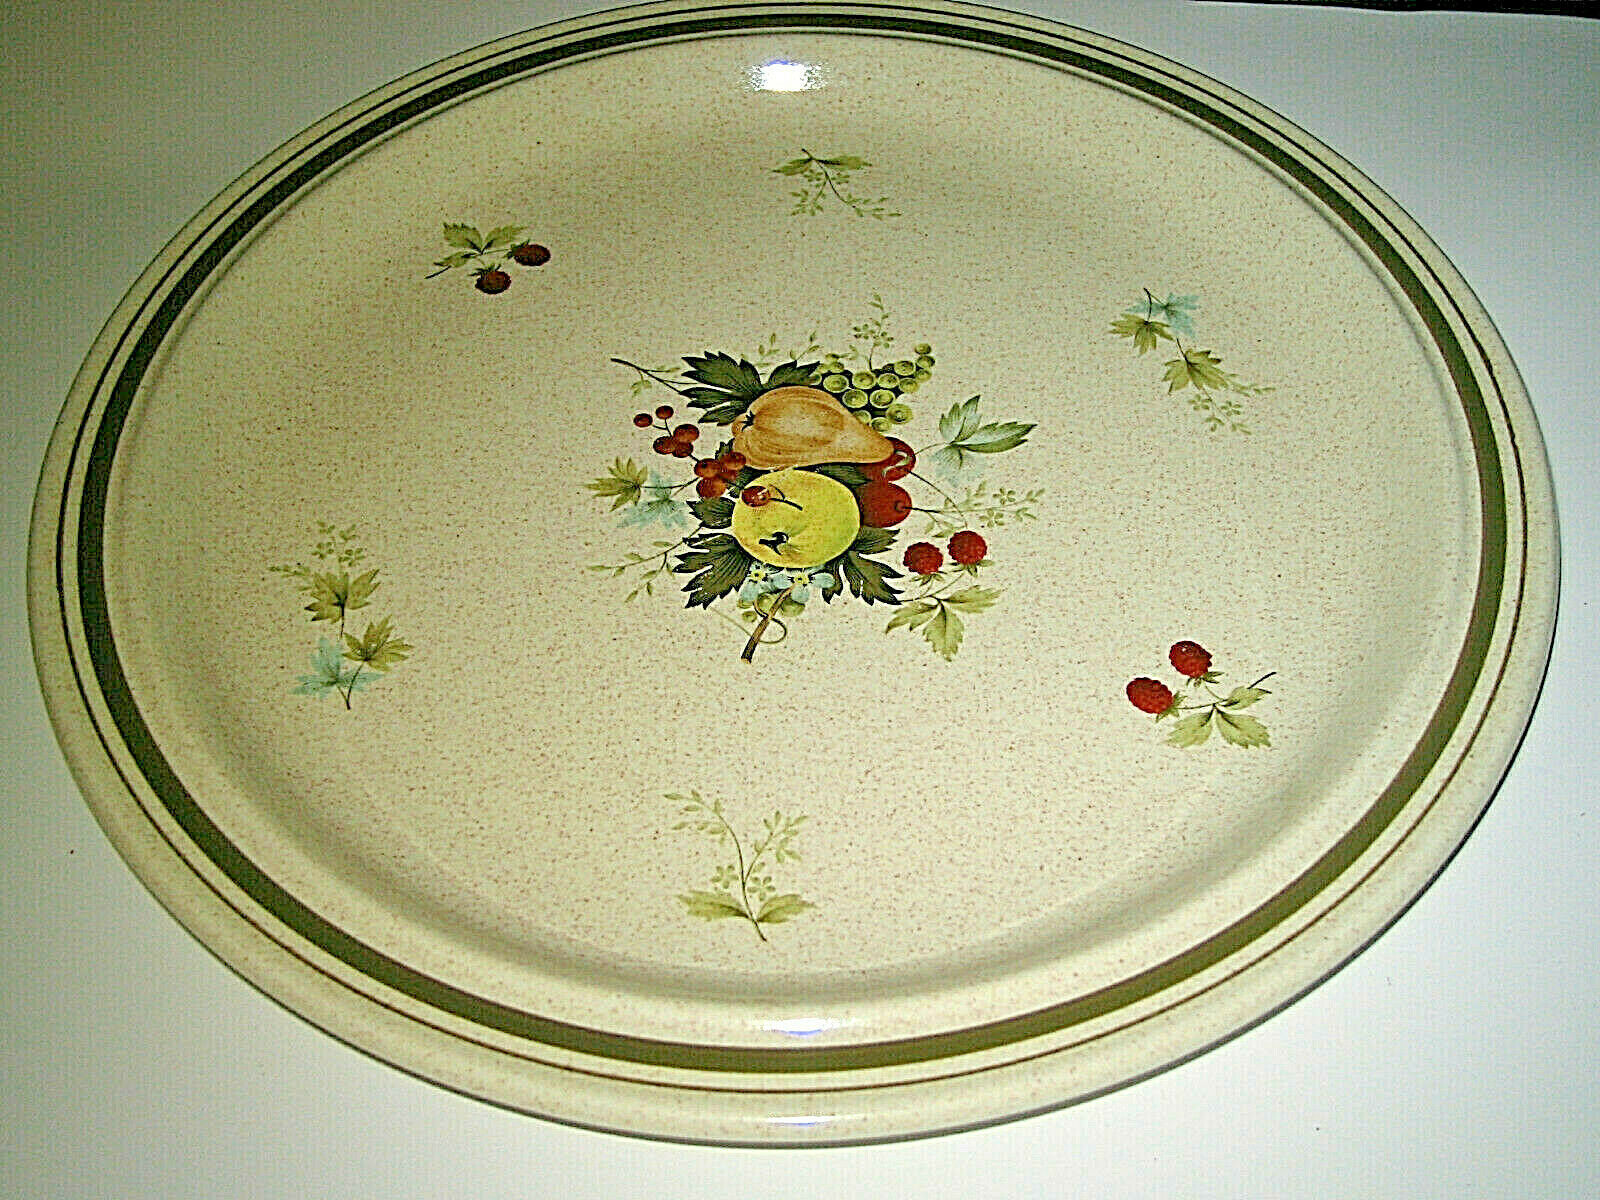 Primary image for Royal Doulton Lambethware Cornwall Dinner Plates 4-pc 10 1/2" double trim LS1015